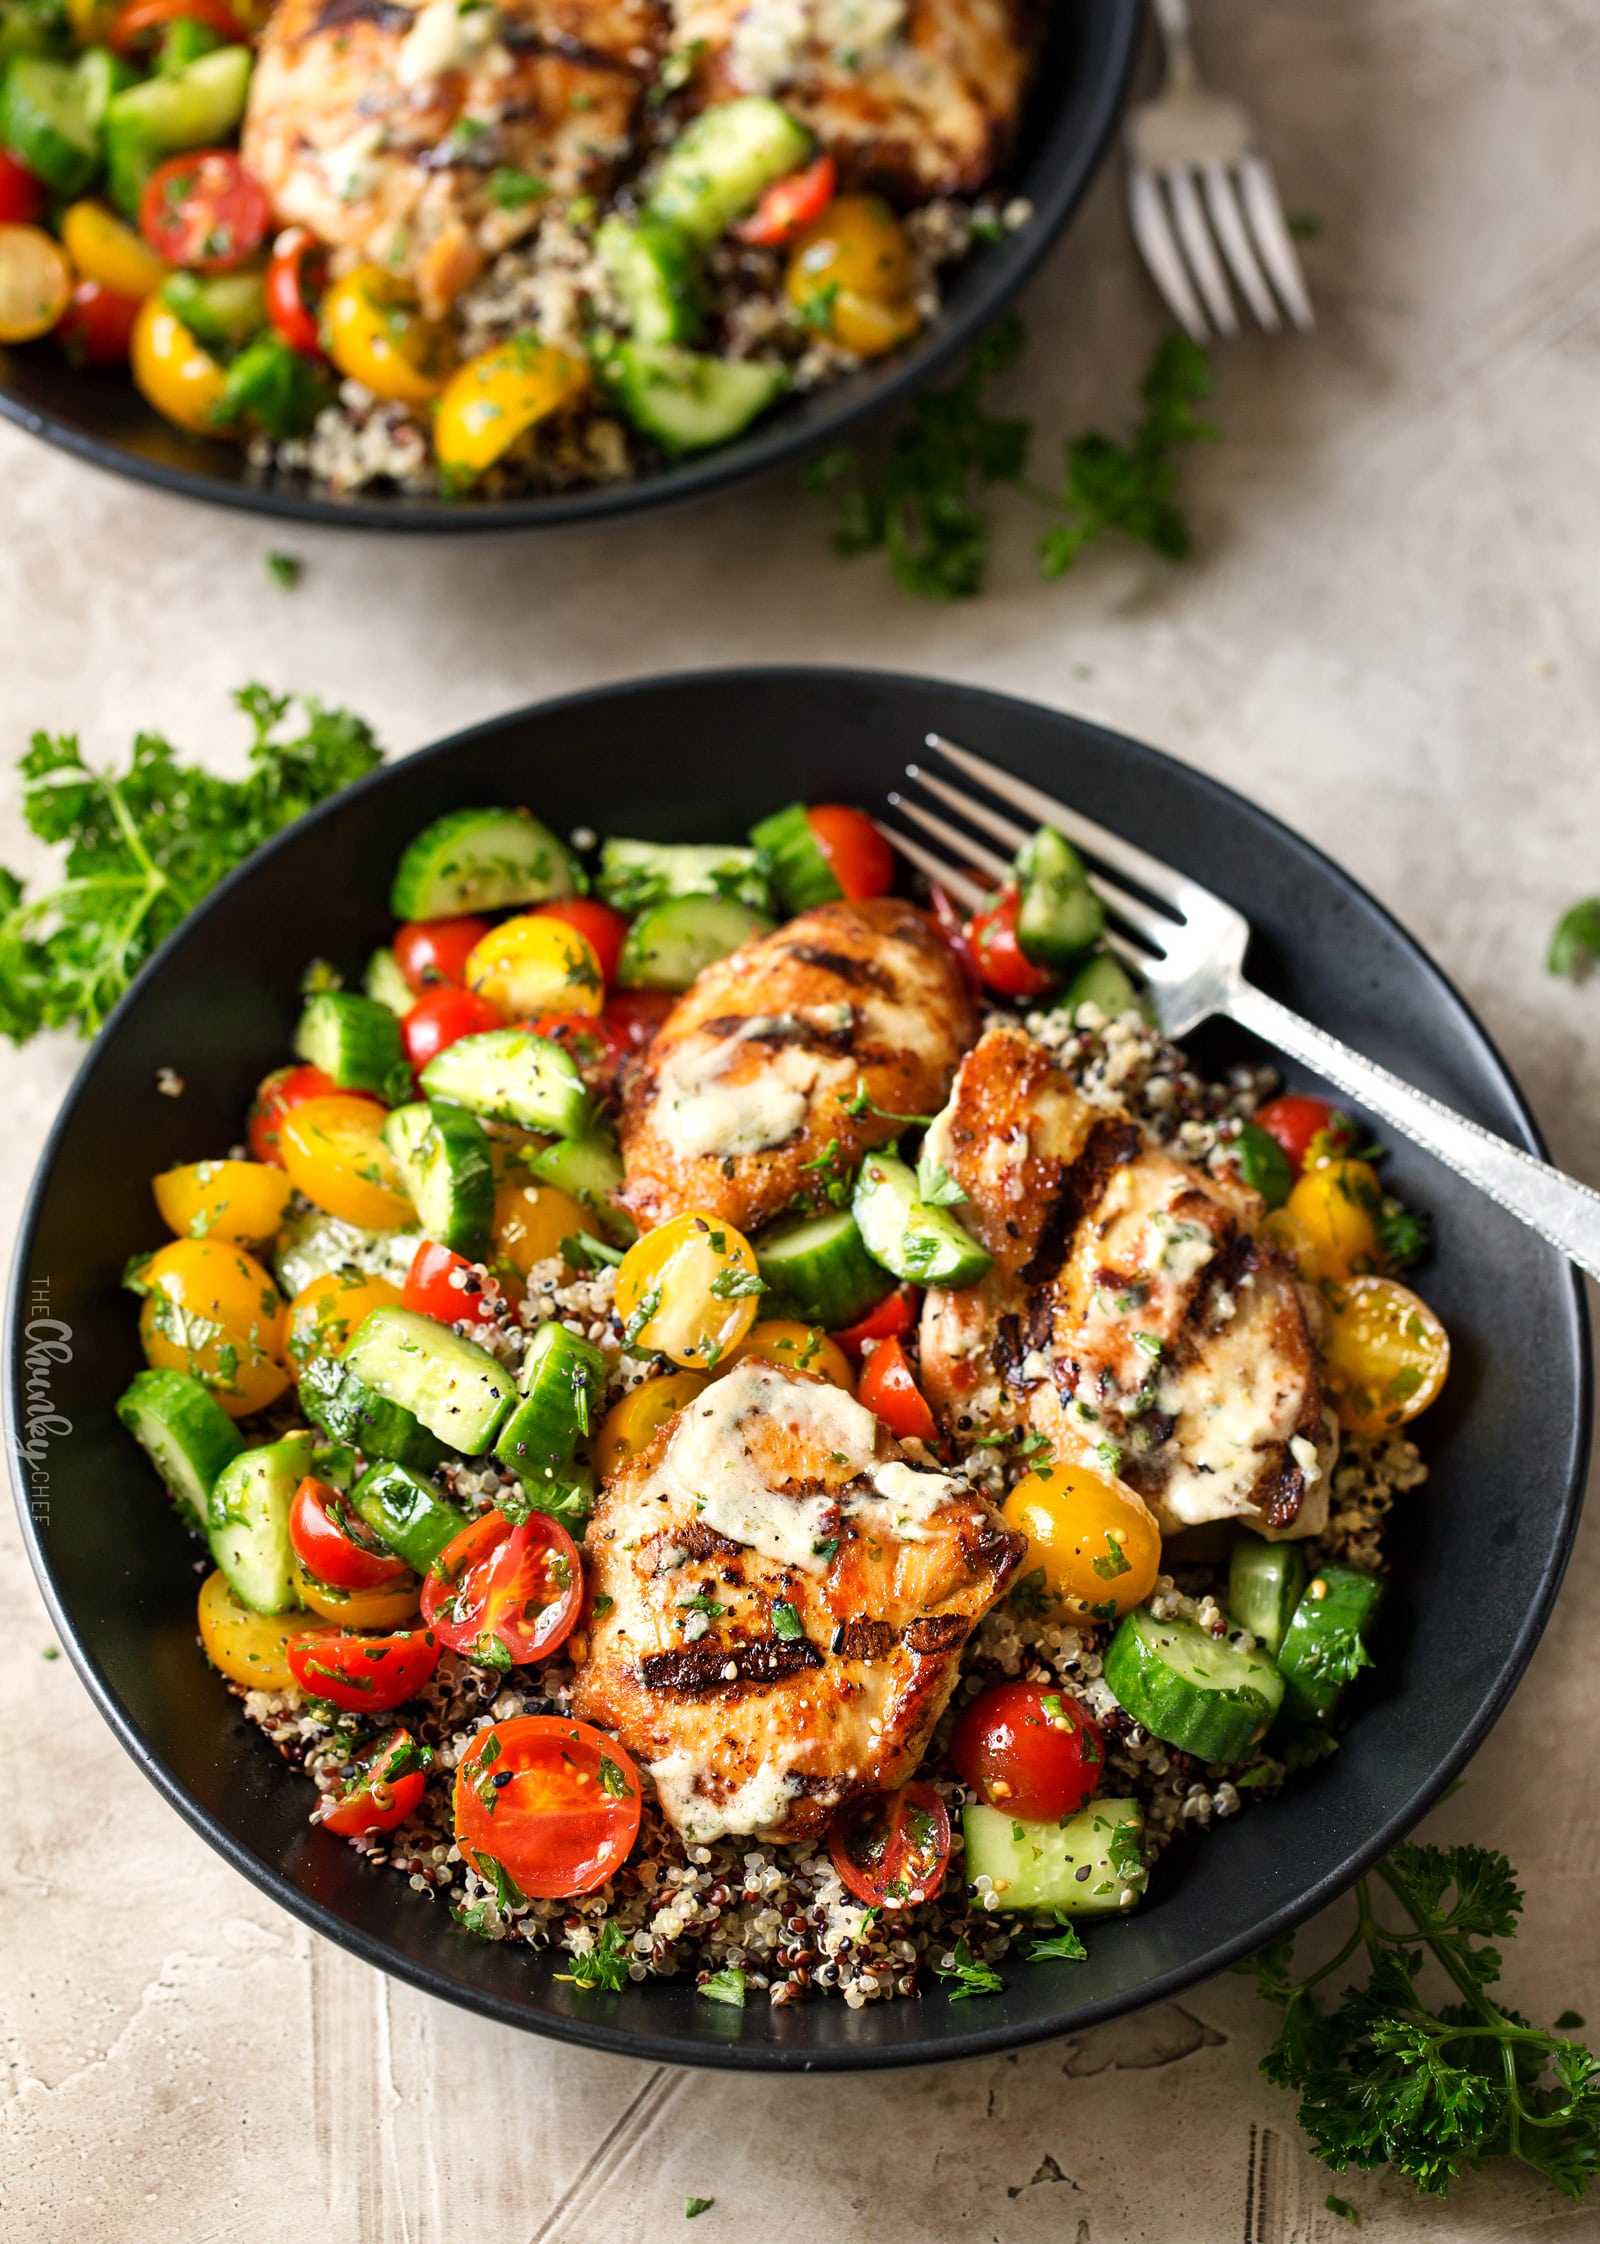 Tahini Marinated Chicken Buddha Bowl | Healthy, delicious, and easy to make... these buddha bowls are the perfect dinner or lunch! You'll love the tahini marinade that doubles as a sauce! | http://thechunkychef.com